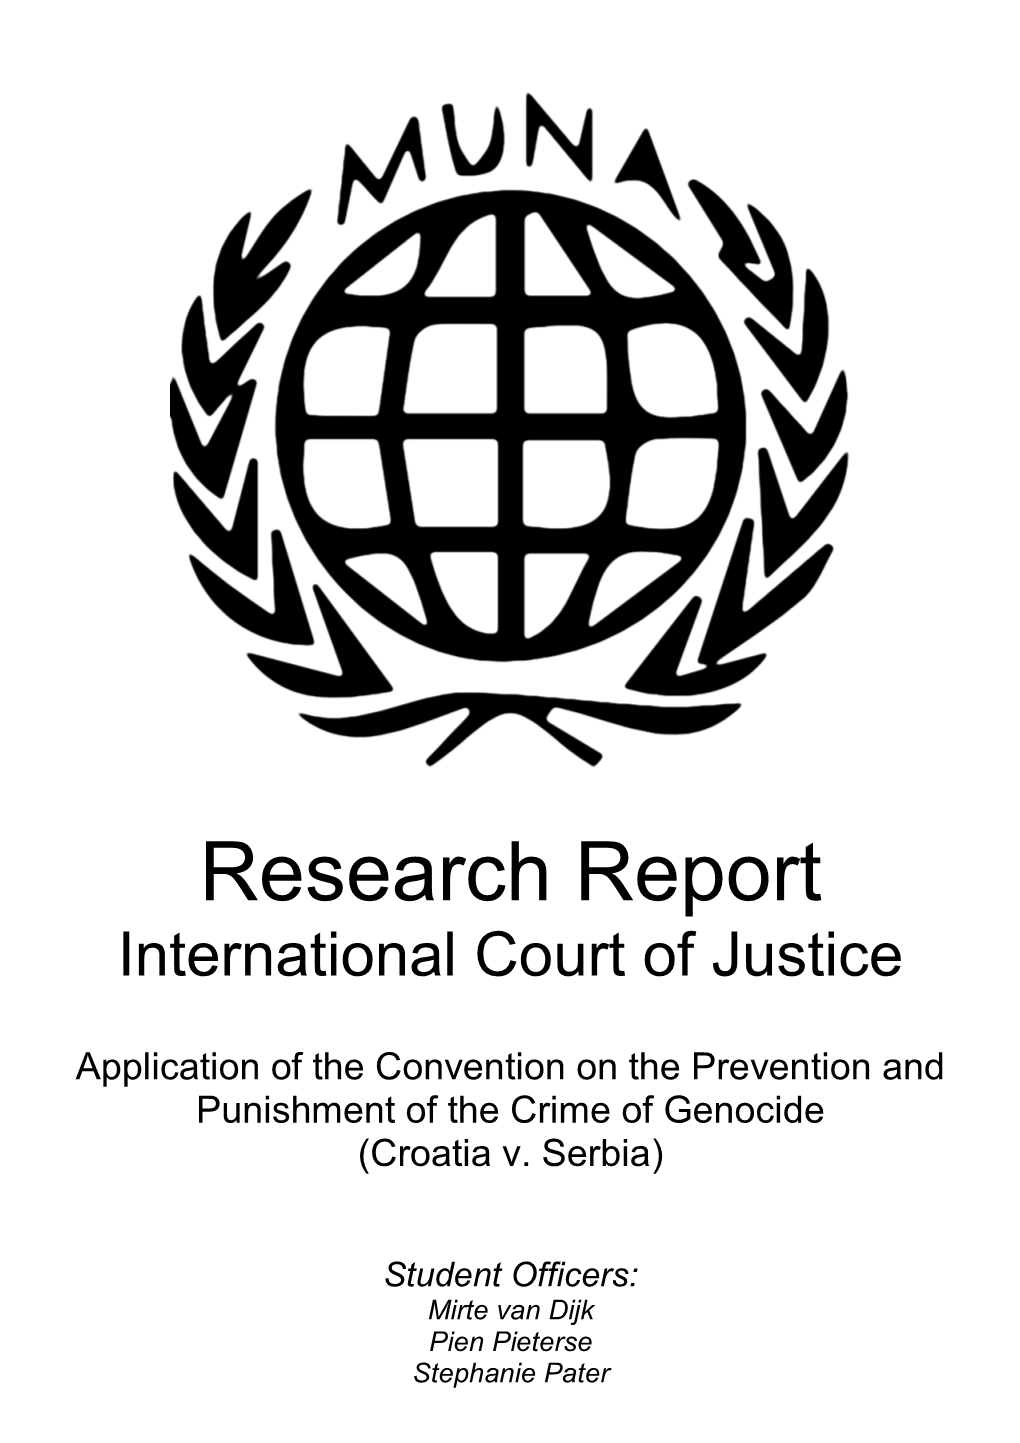 Research Report International Court of Justice